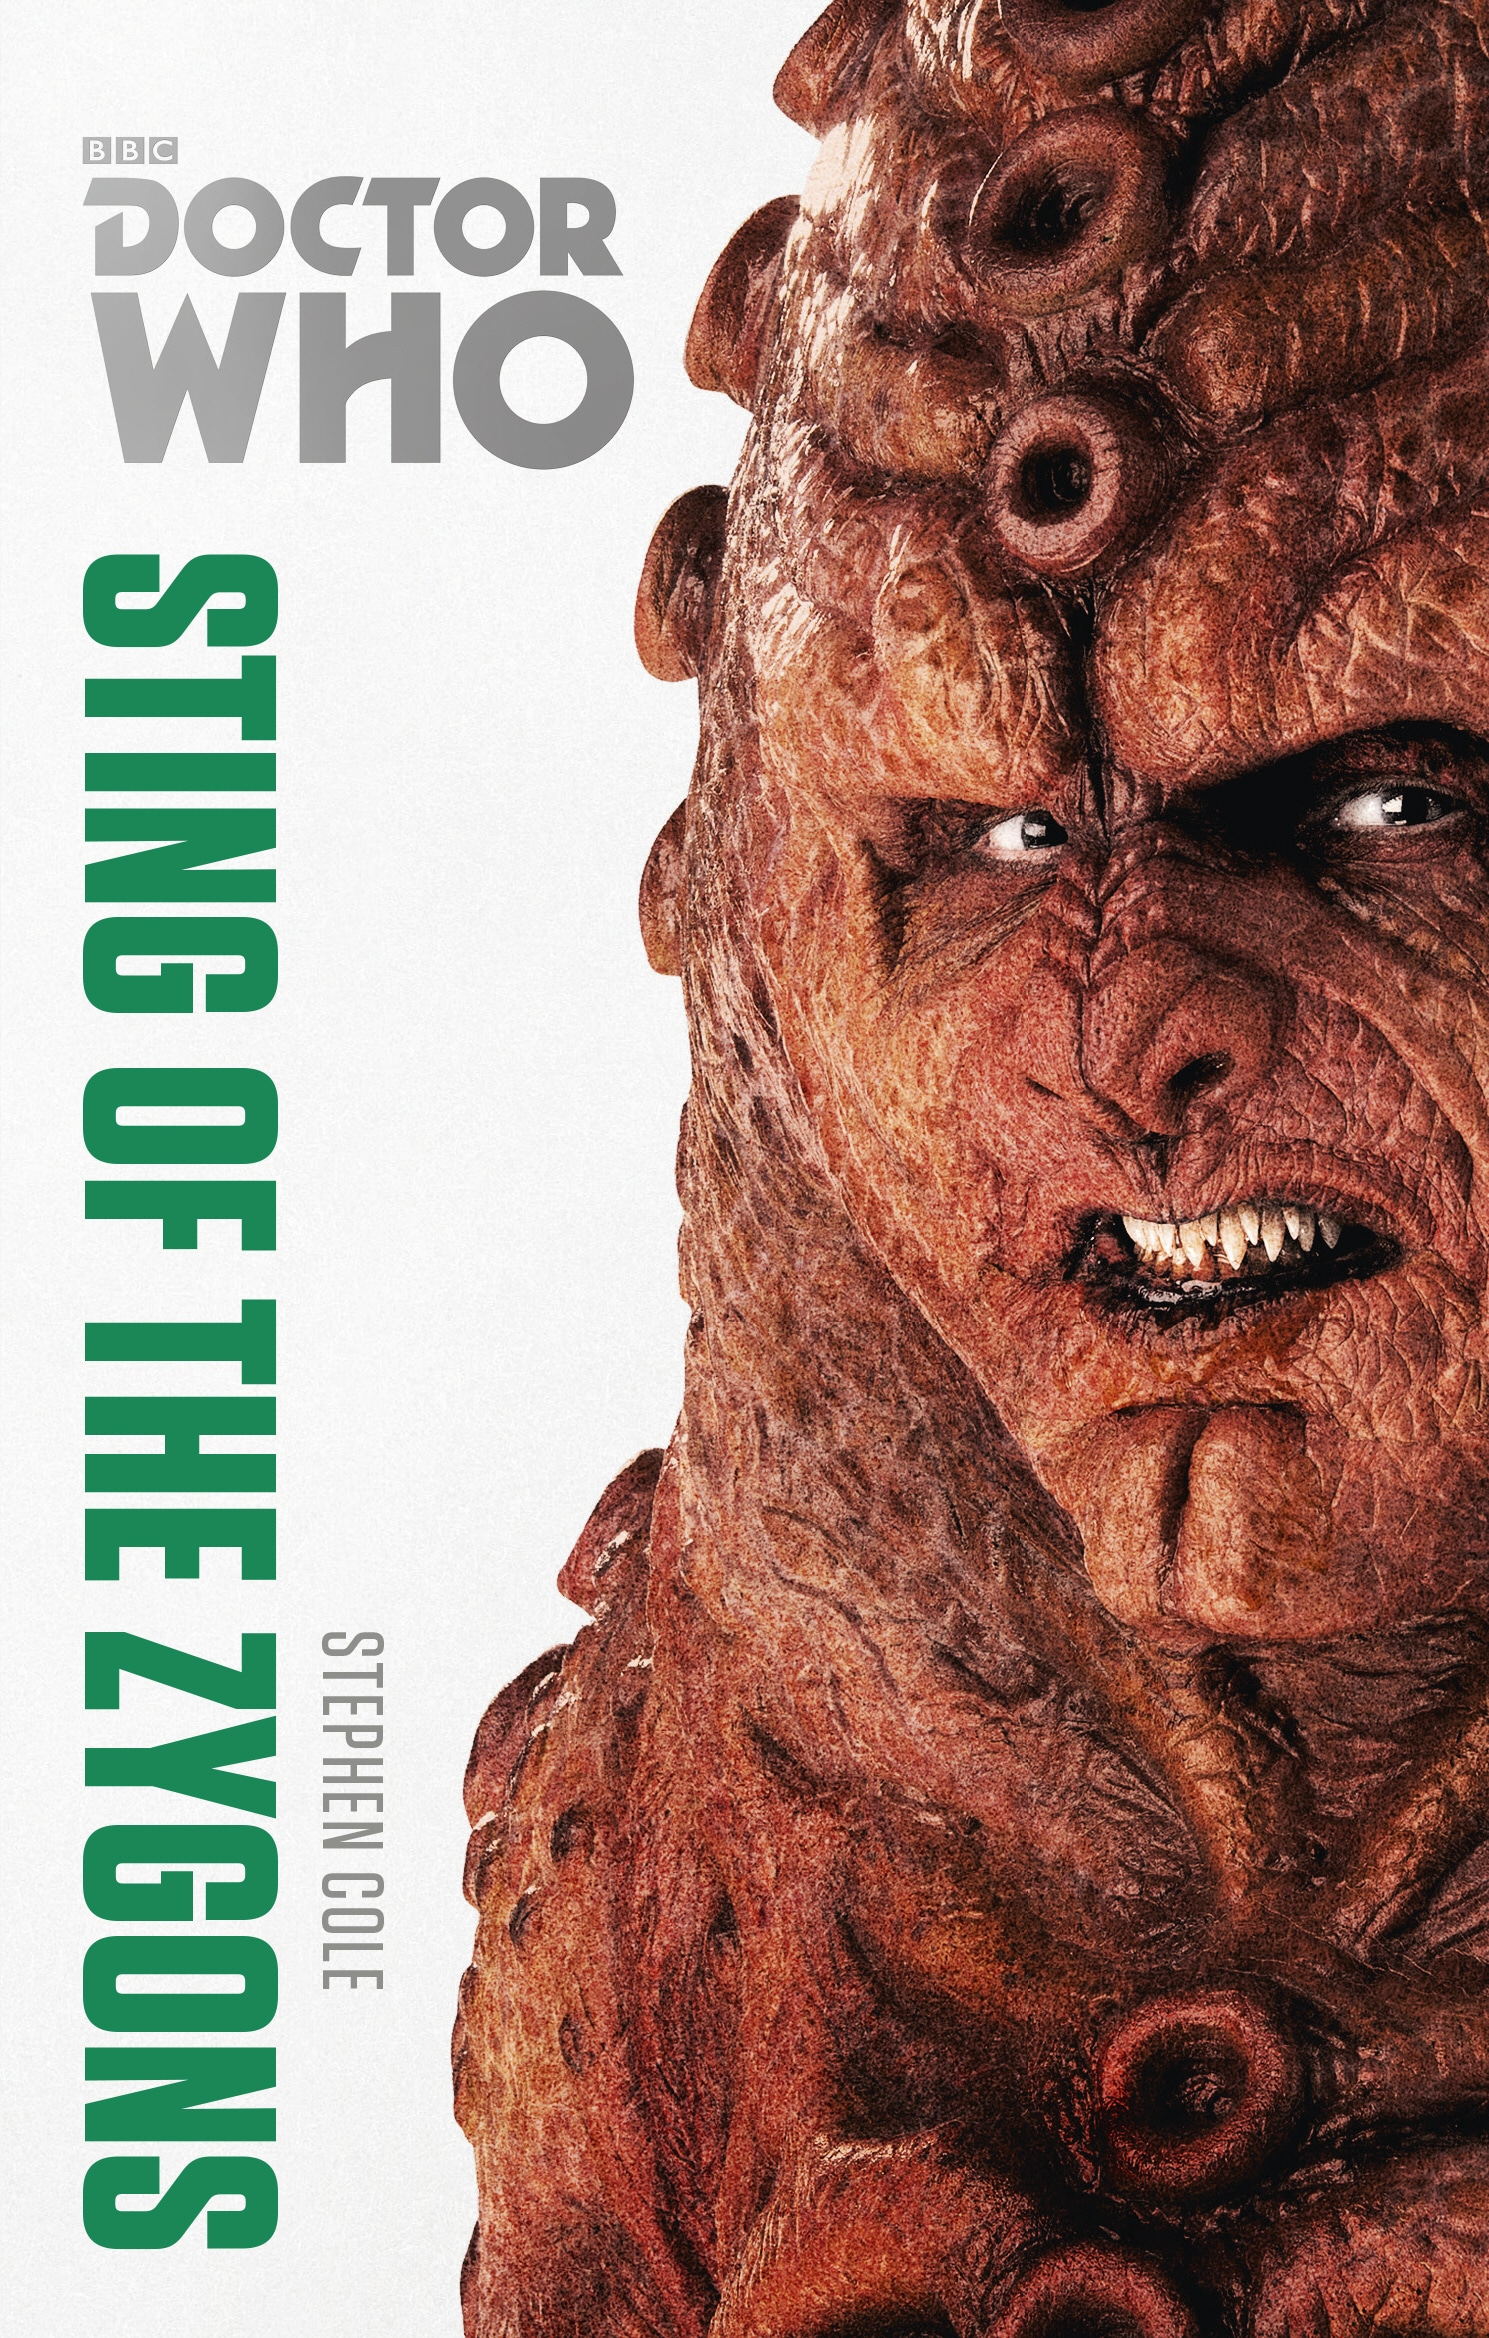 Book “Doctor Who: Sting of the Zygons” by Stephen Cole — March 6, 2014